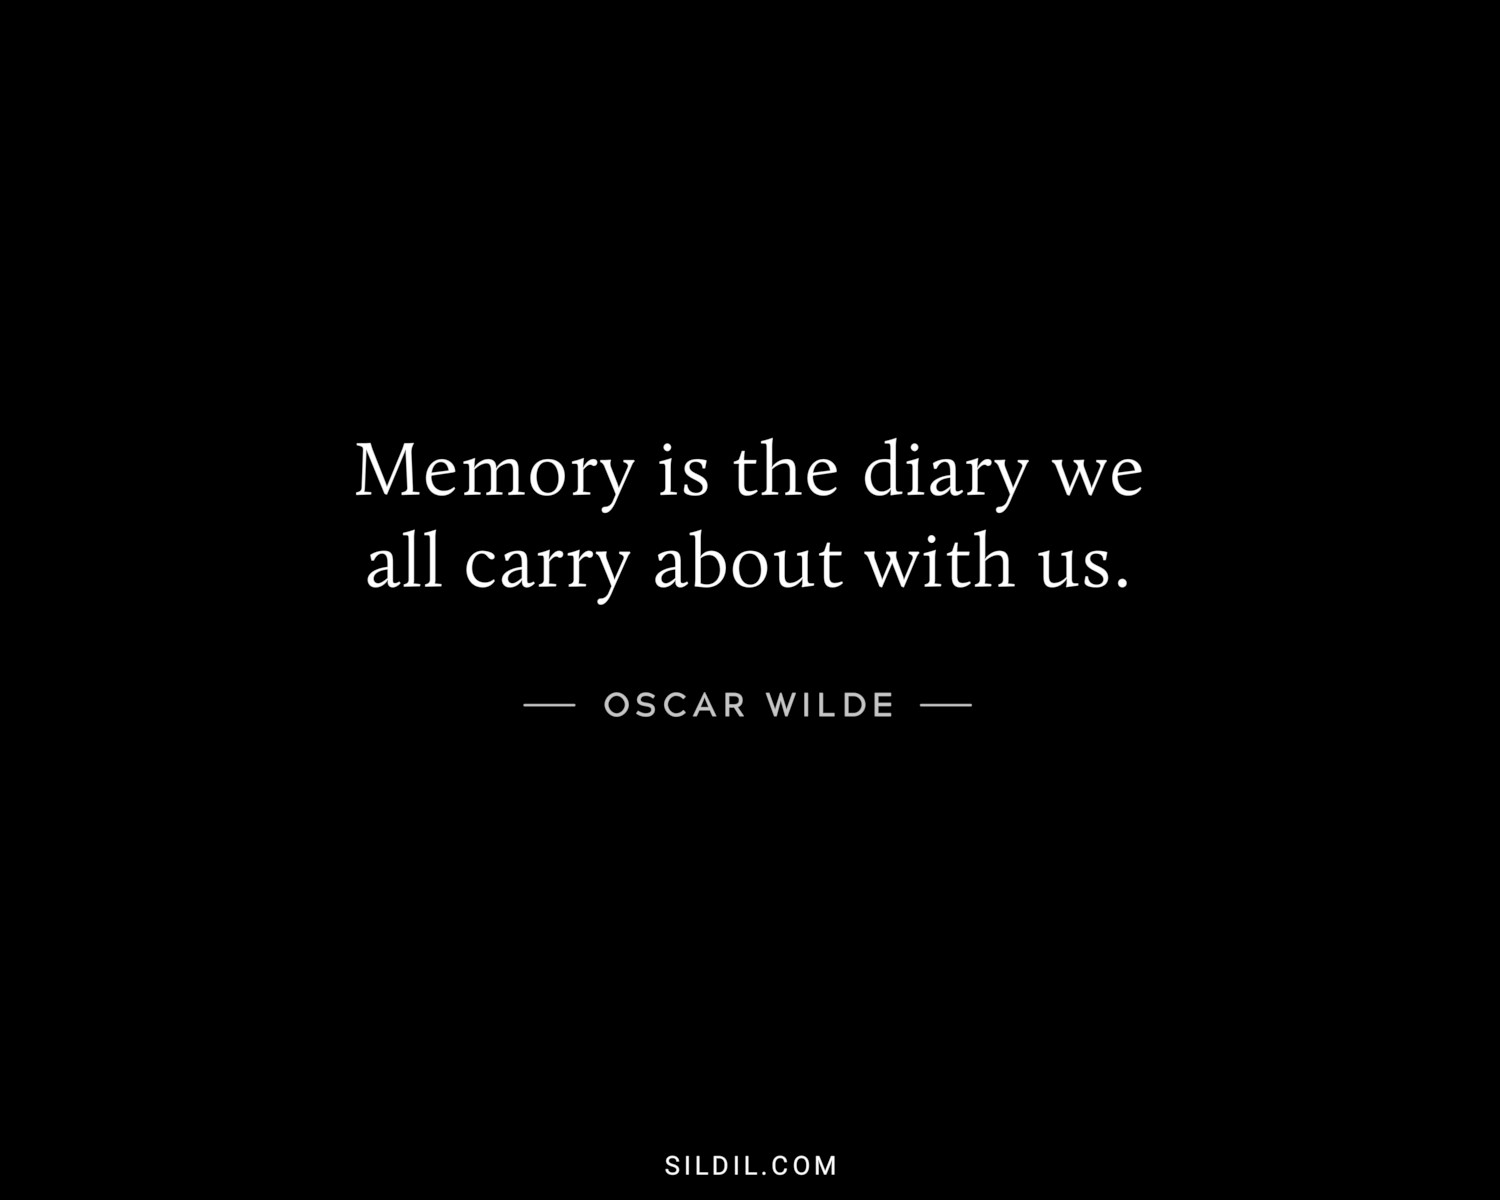 Memory is the diary we all carry about with us.